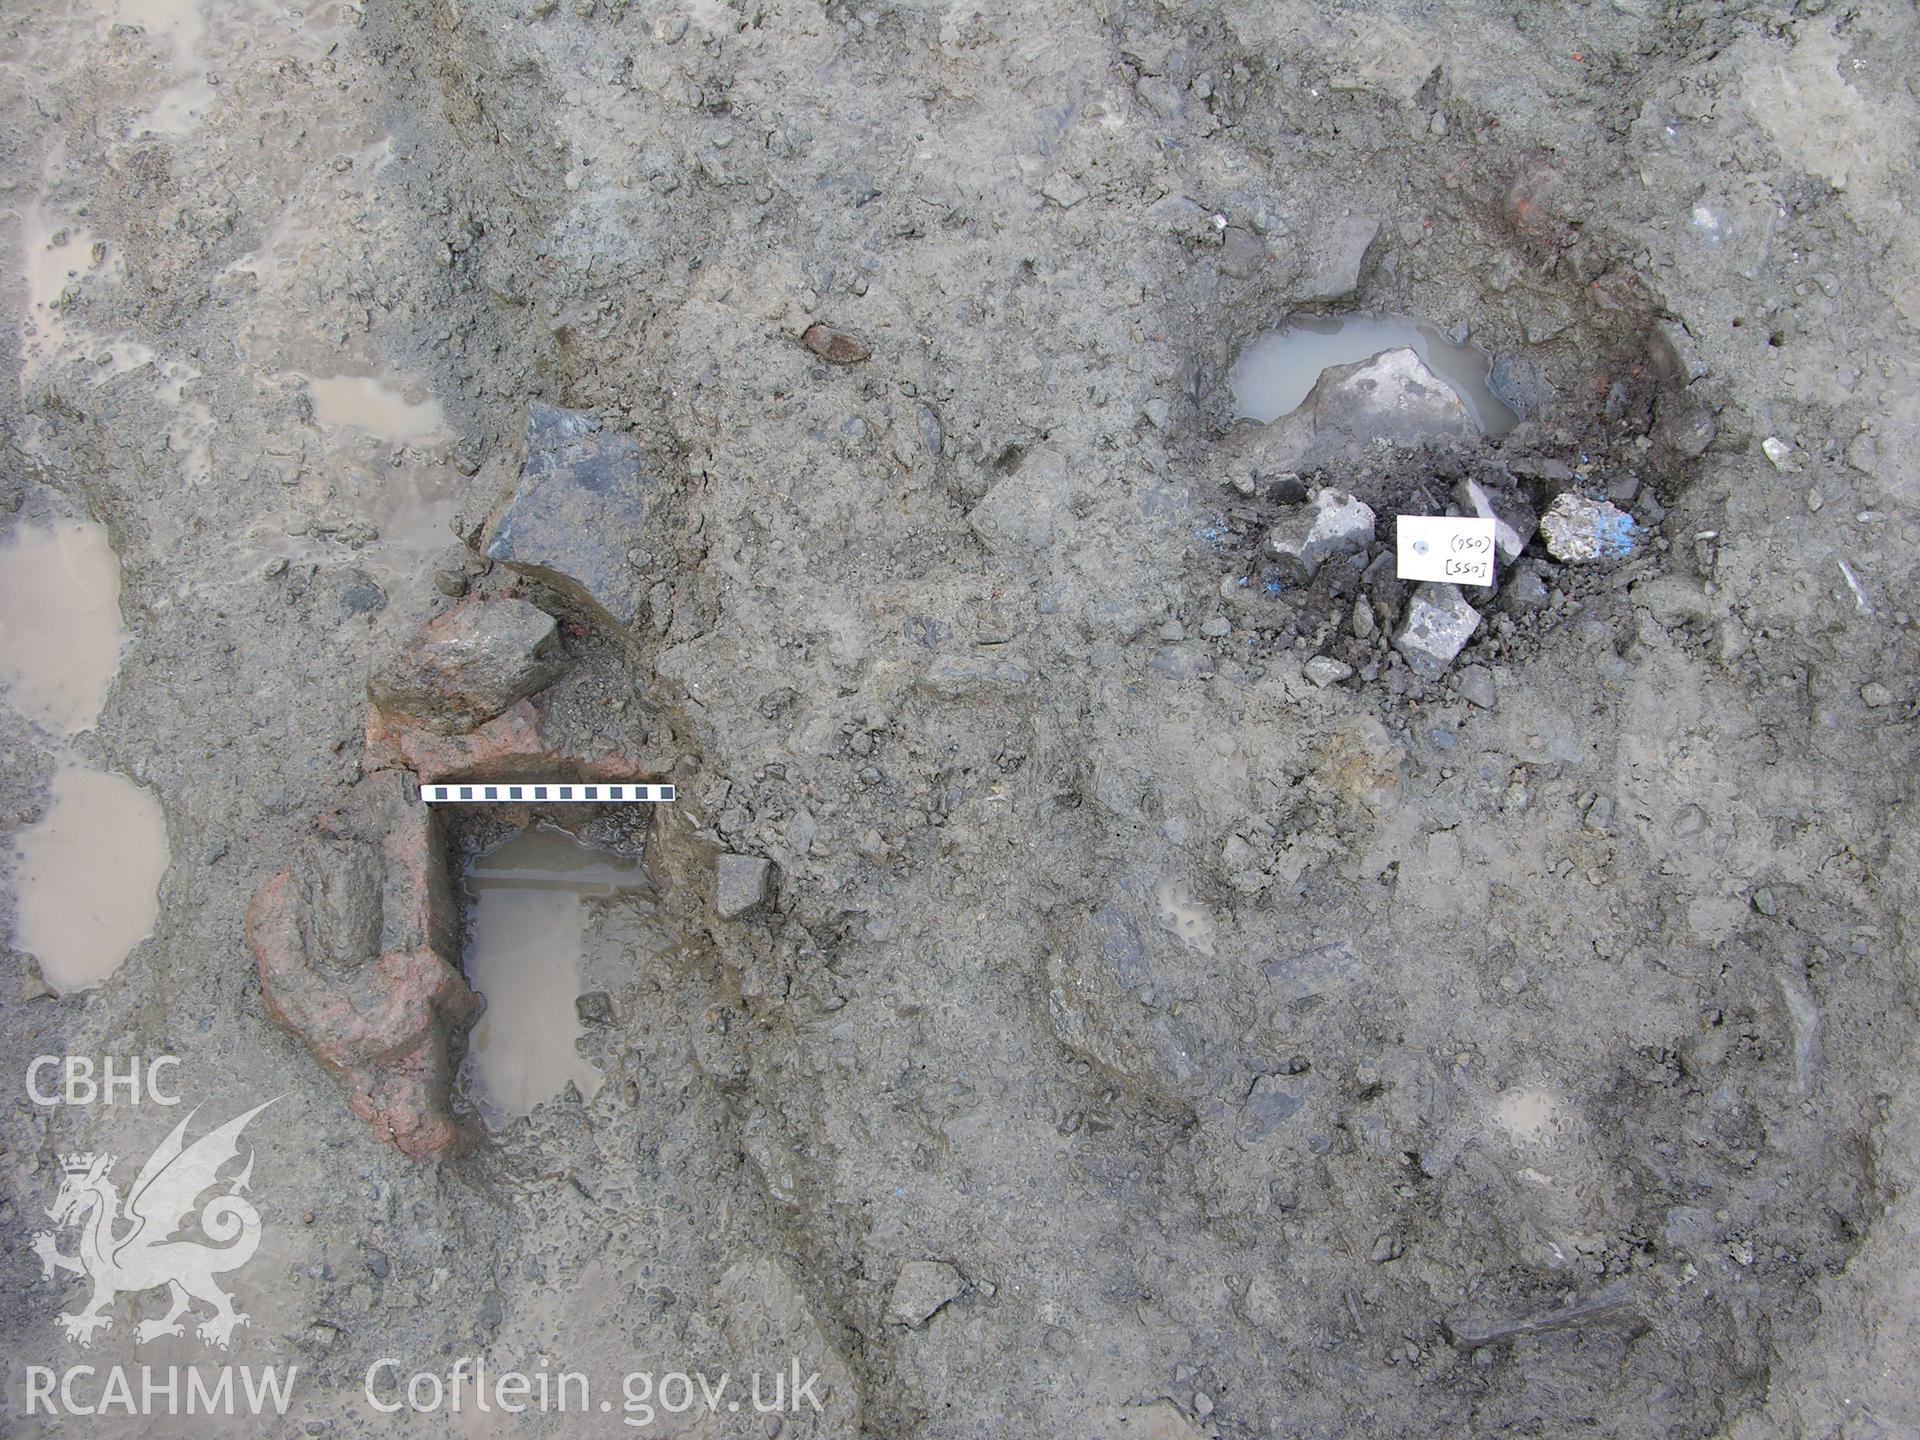 Colour digital photograph showing view of posthole with cement/plaster setting (left) - part of the Archaeological Excavation report for Horse Yard Farm, Evenjobb (CAP Report 607) by Chris E Smith, from a Cambrian Archaeological Projects assessment survey.